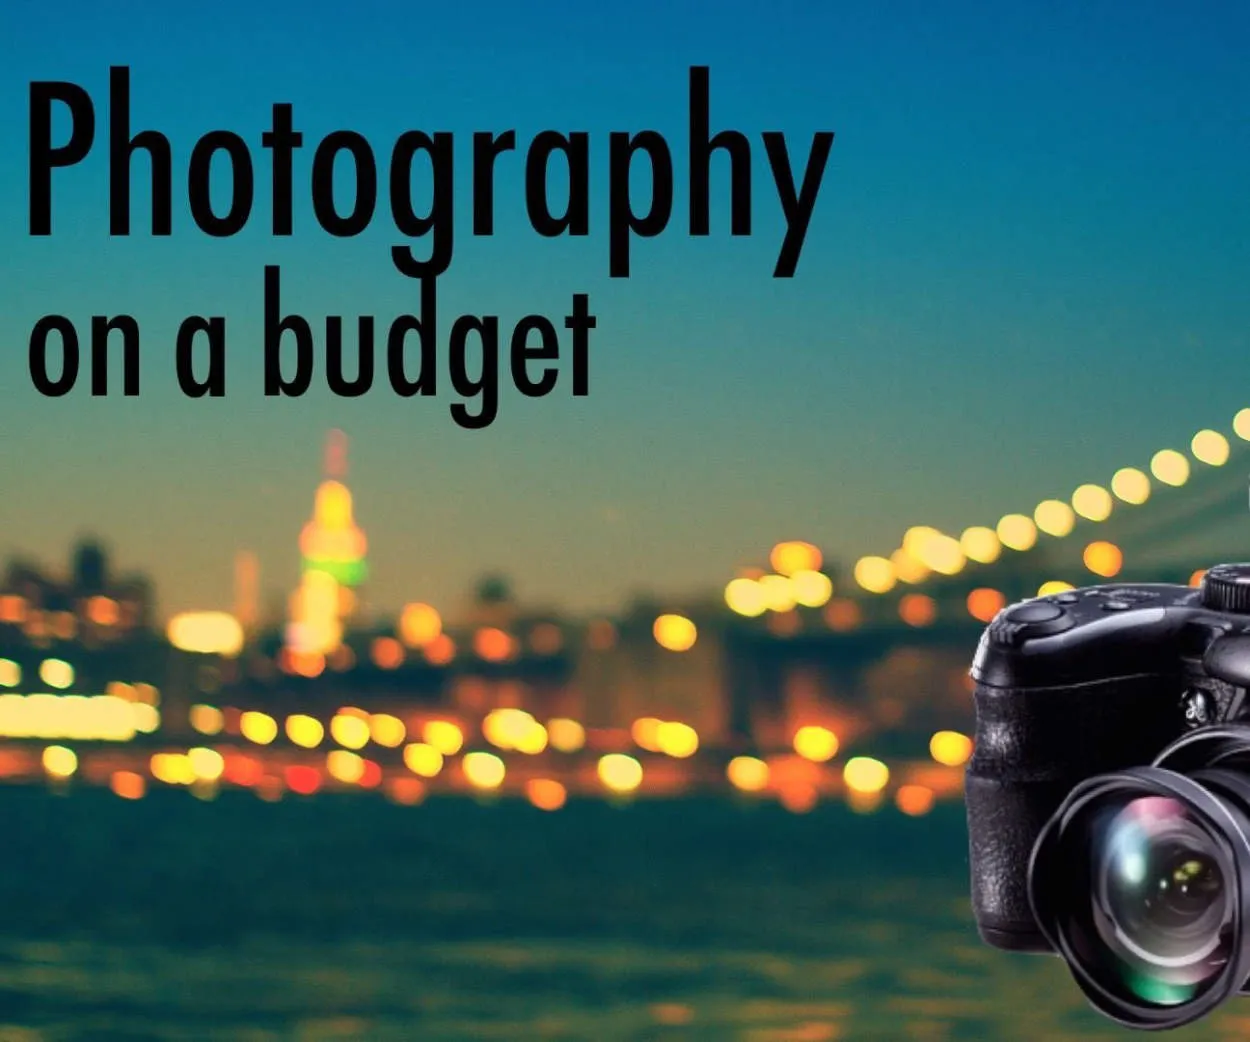 The Budget Photographer: Finding Quality Cameras on a Tight Budget